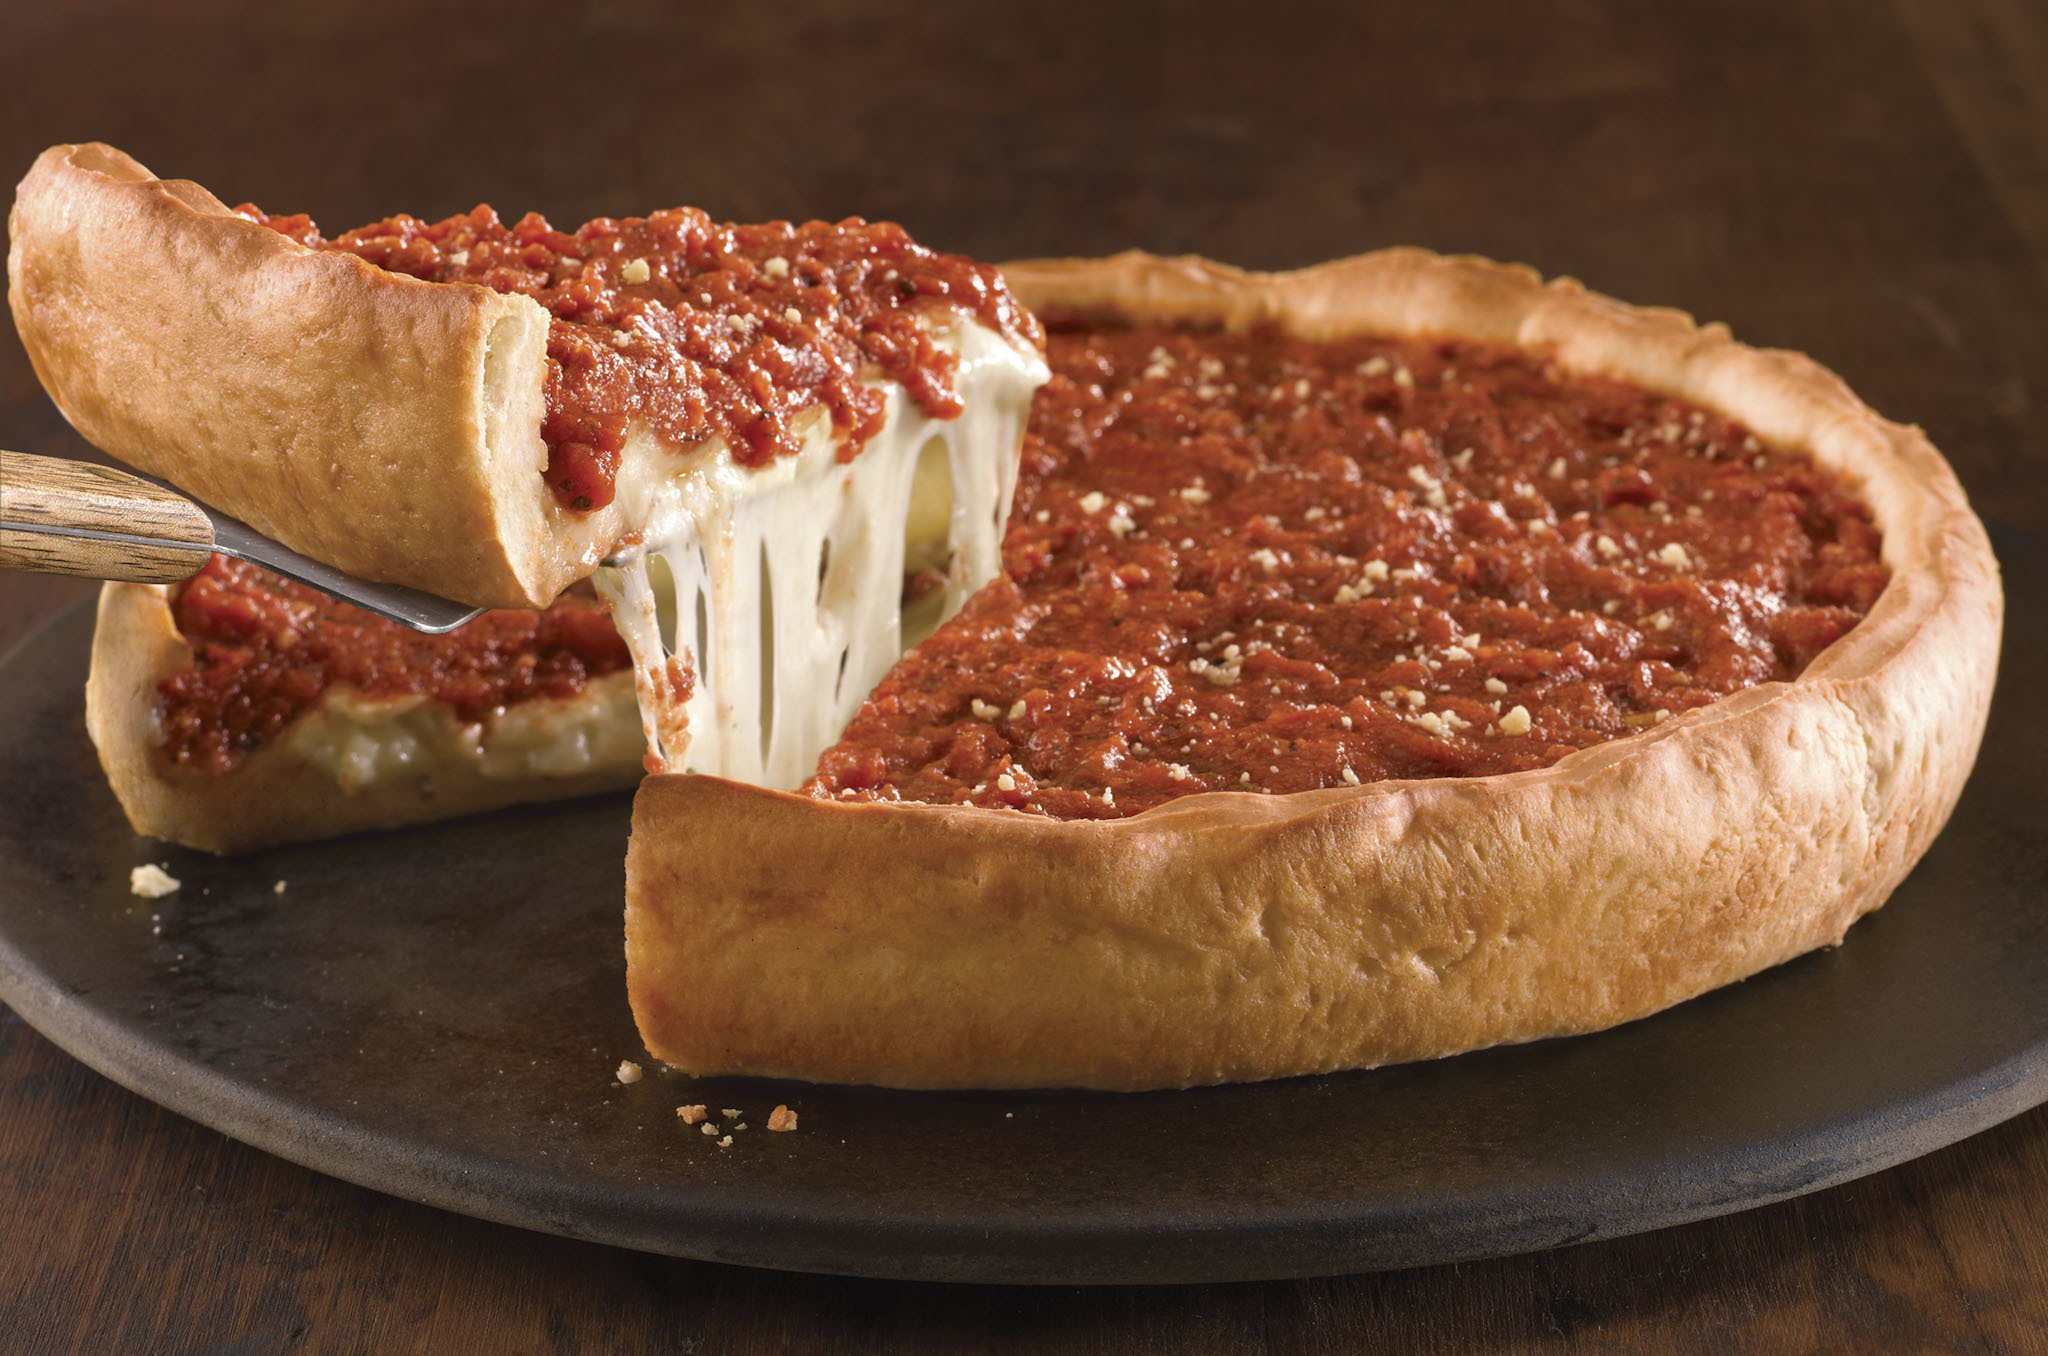 Our Guide To The Best Deep Dish Pizza In Chicago